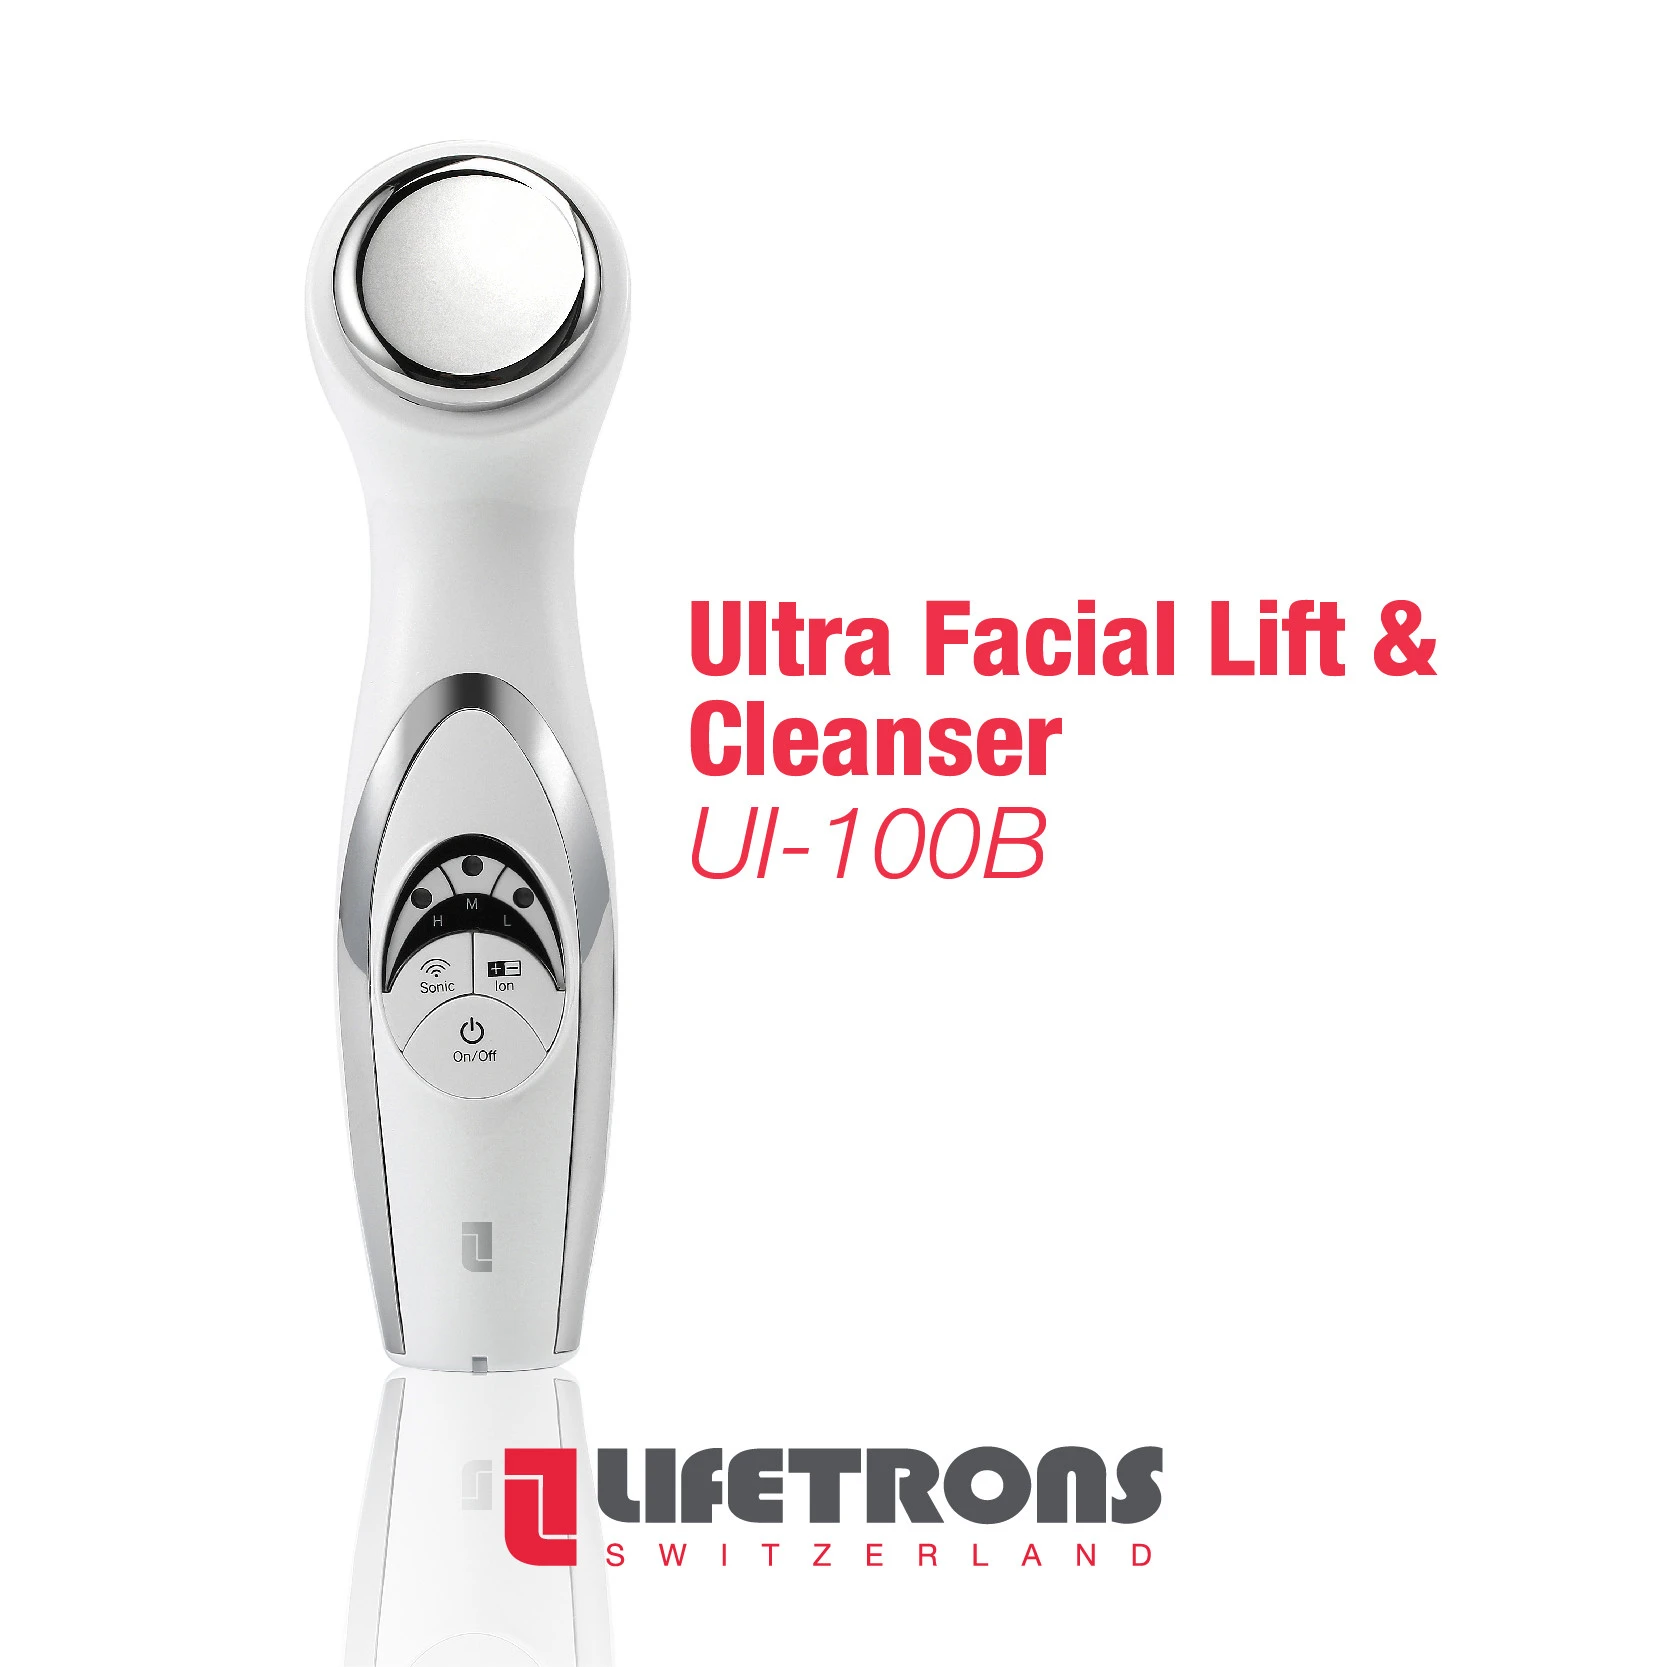 Premium Export Ultra Facial Lift & Cleanser with Ultrasonic & ION UI-100 multi-functional beauty equipment